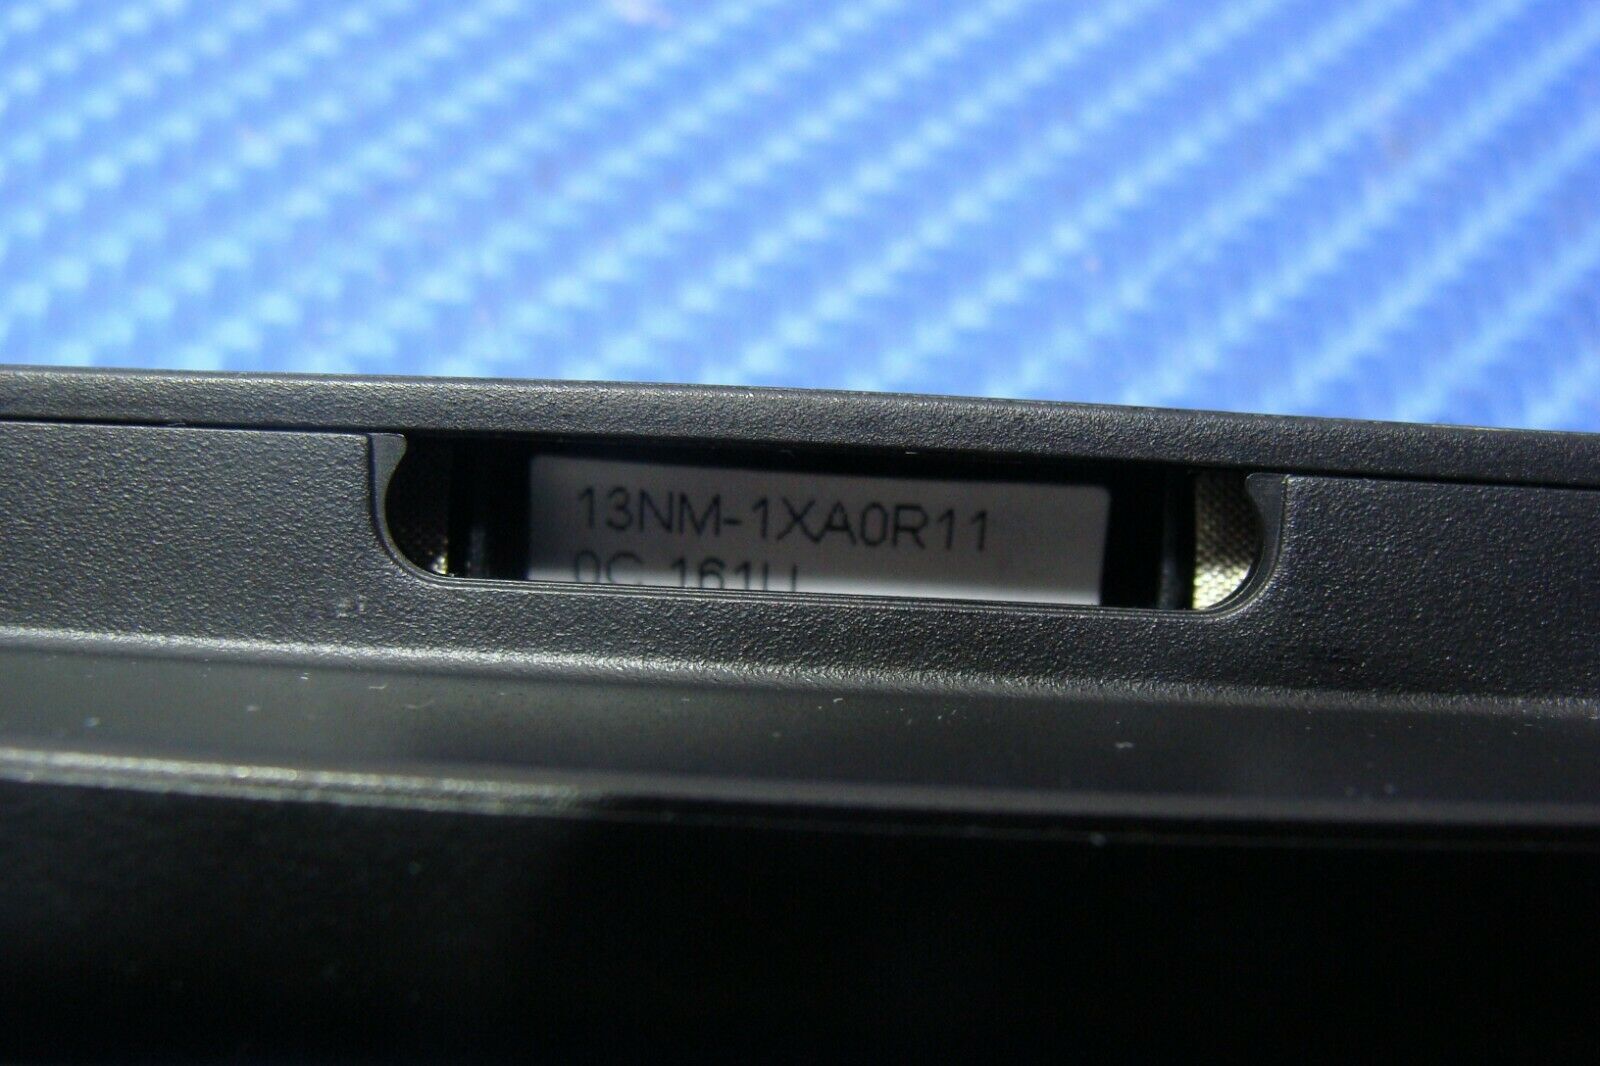 Acer Aspire Switch 10.1